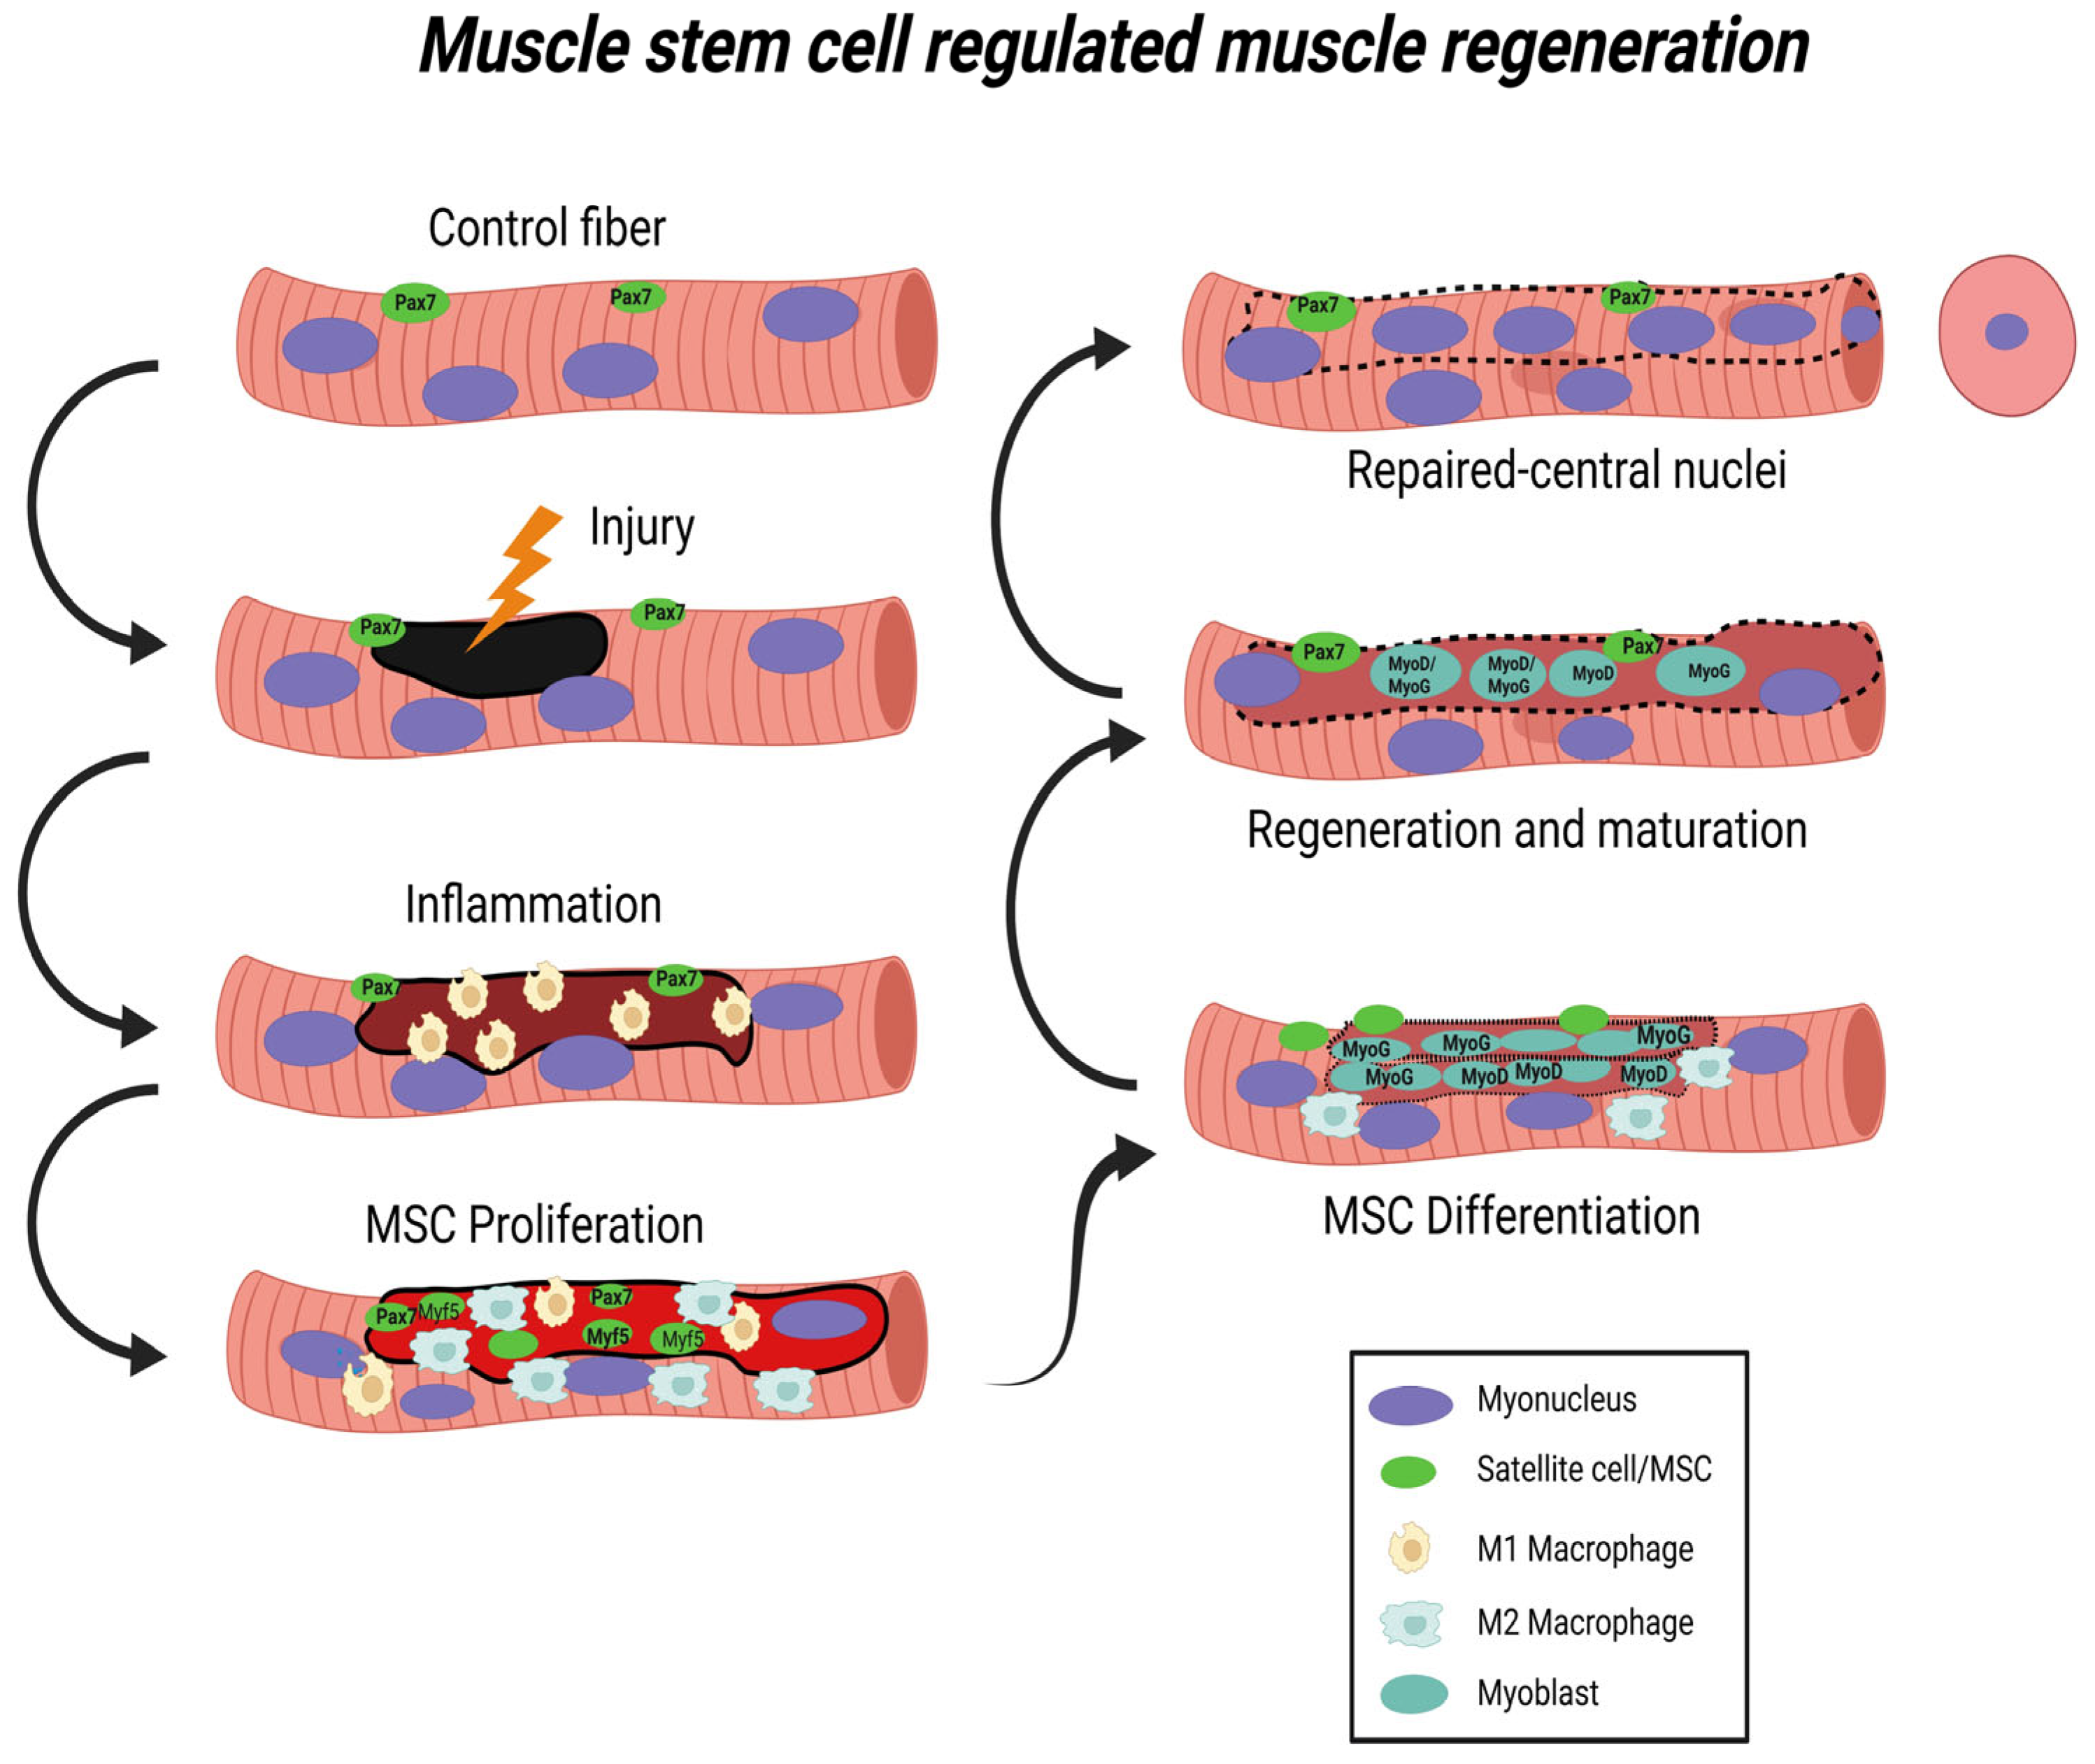 https://www.mdpi.com/muscles/muscles-02-00011/article_deploy/html/images/muscles-02-00011-g001.png